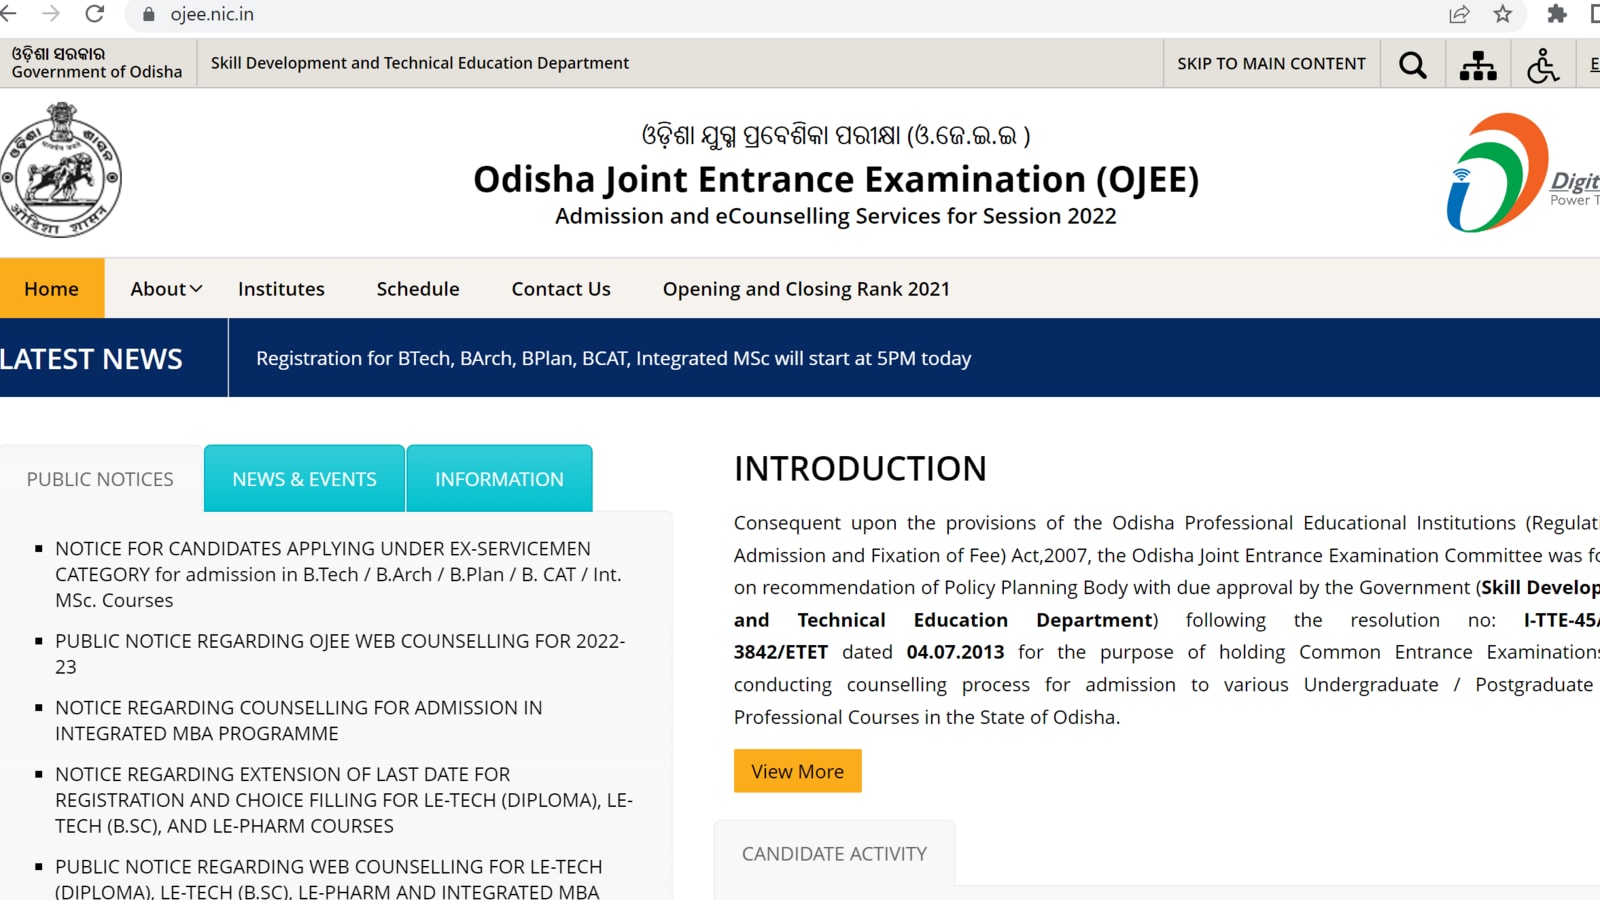 OJEE 2022 counselling registrations to begin today at ojee.nic.in, details here